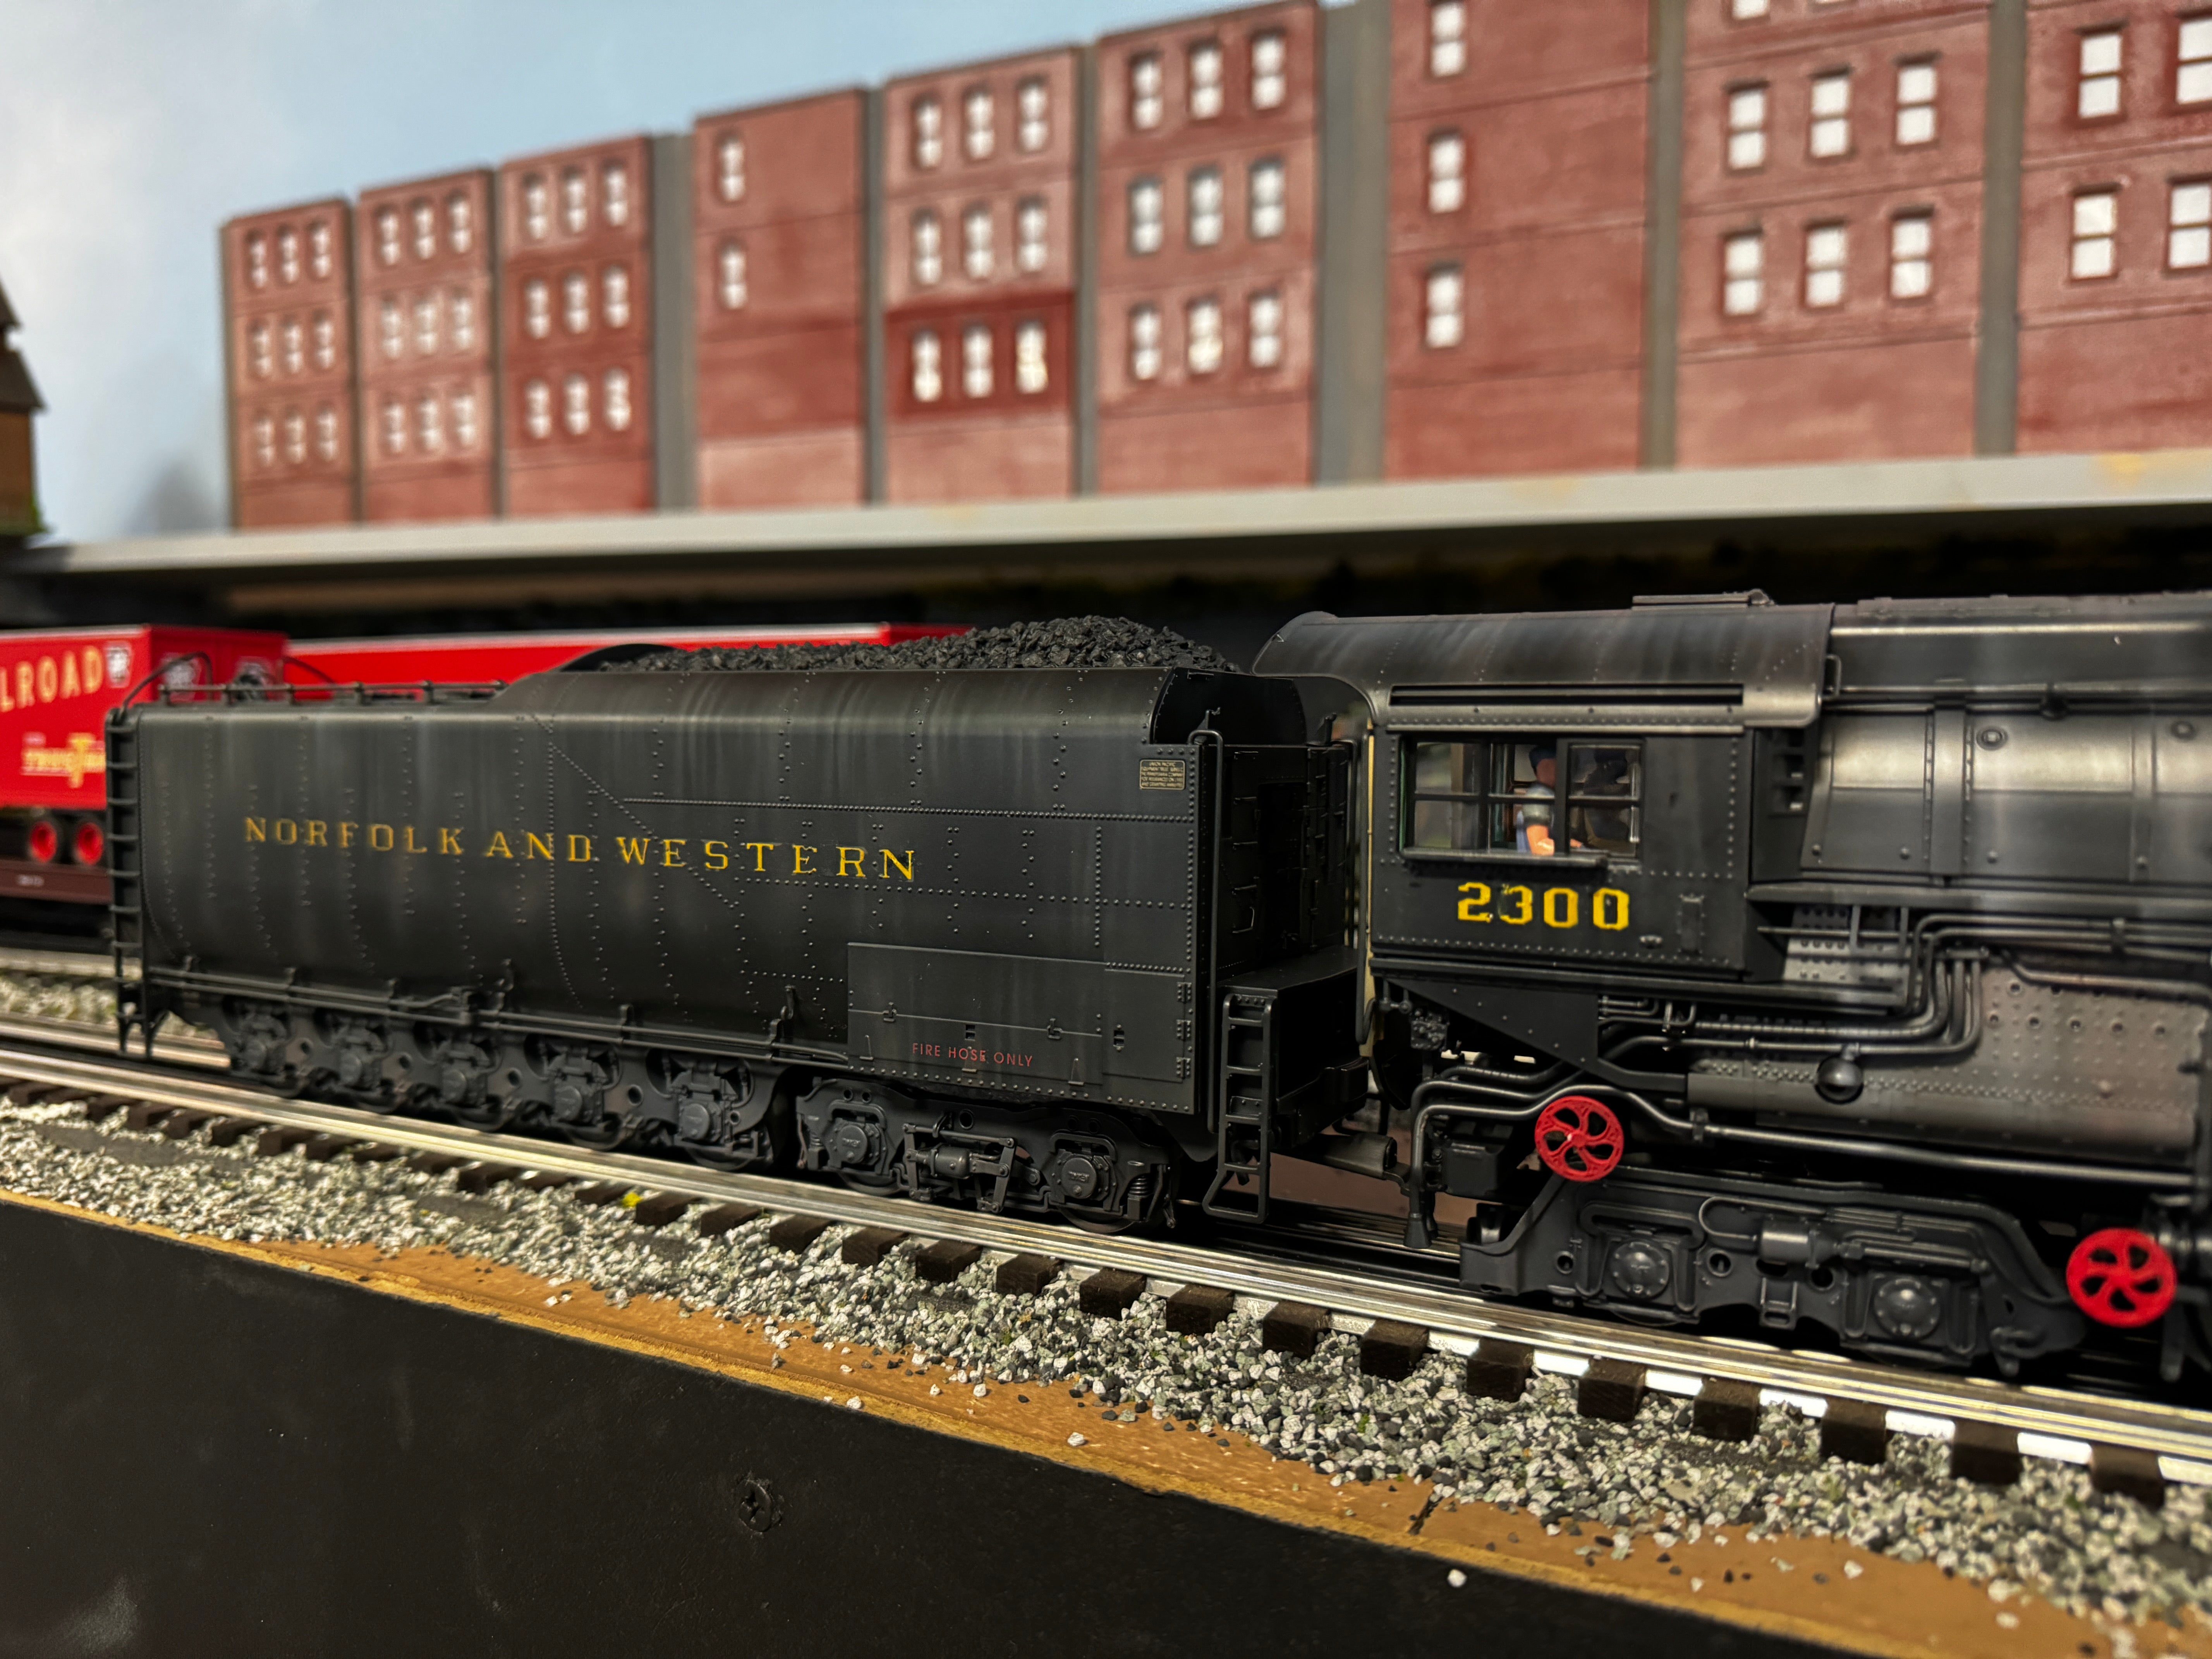 Lionel 2331270NW - Vision Line Big Boy Steam Locomotive "Norfolk & Western" #2300 Custom Pained and Lettered by Harry Hieke